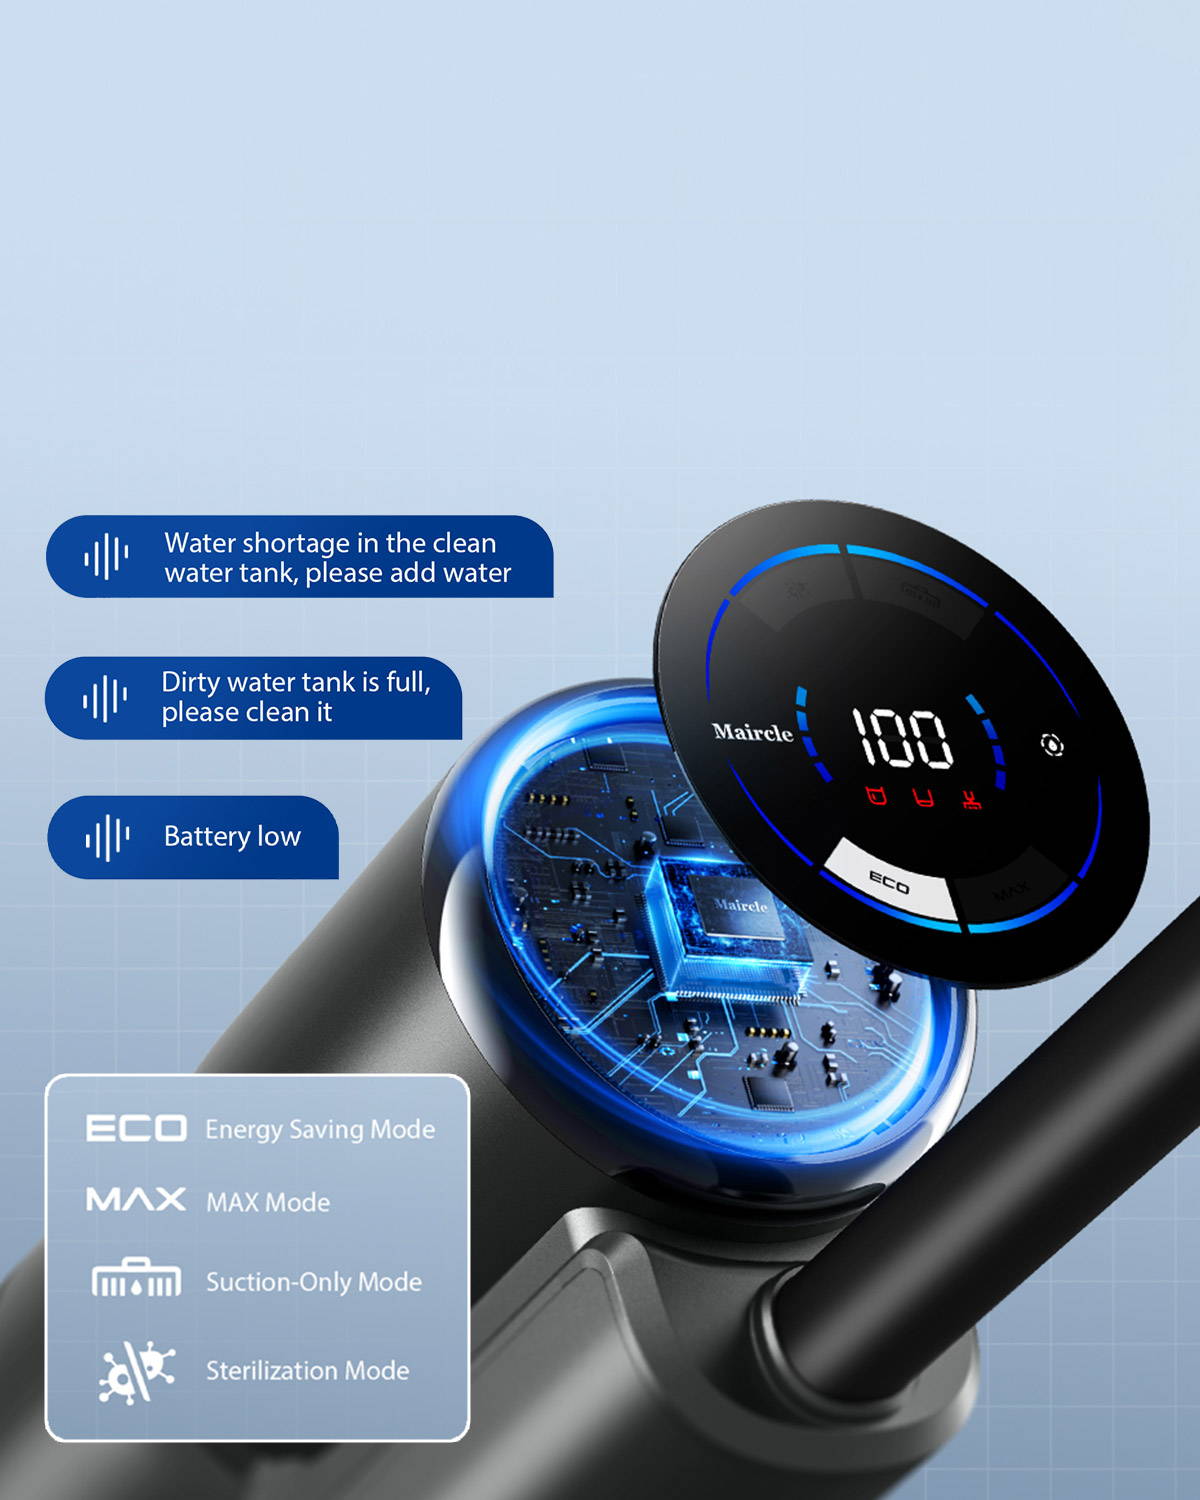 Smart Controls Put Everything at Your Fingertips